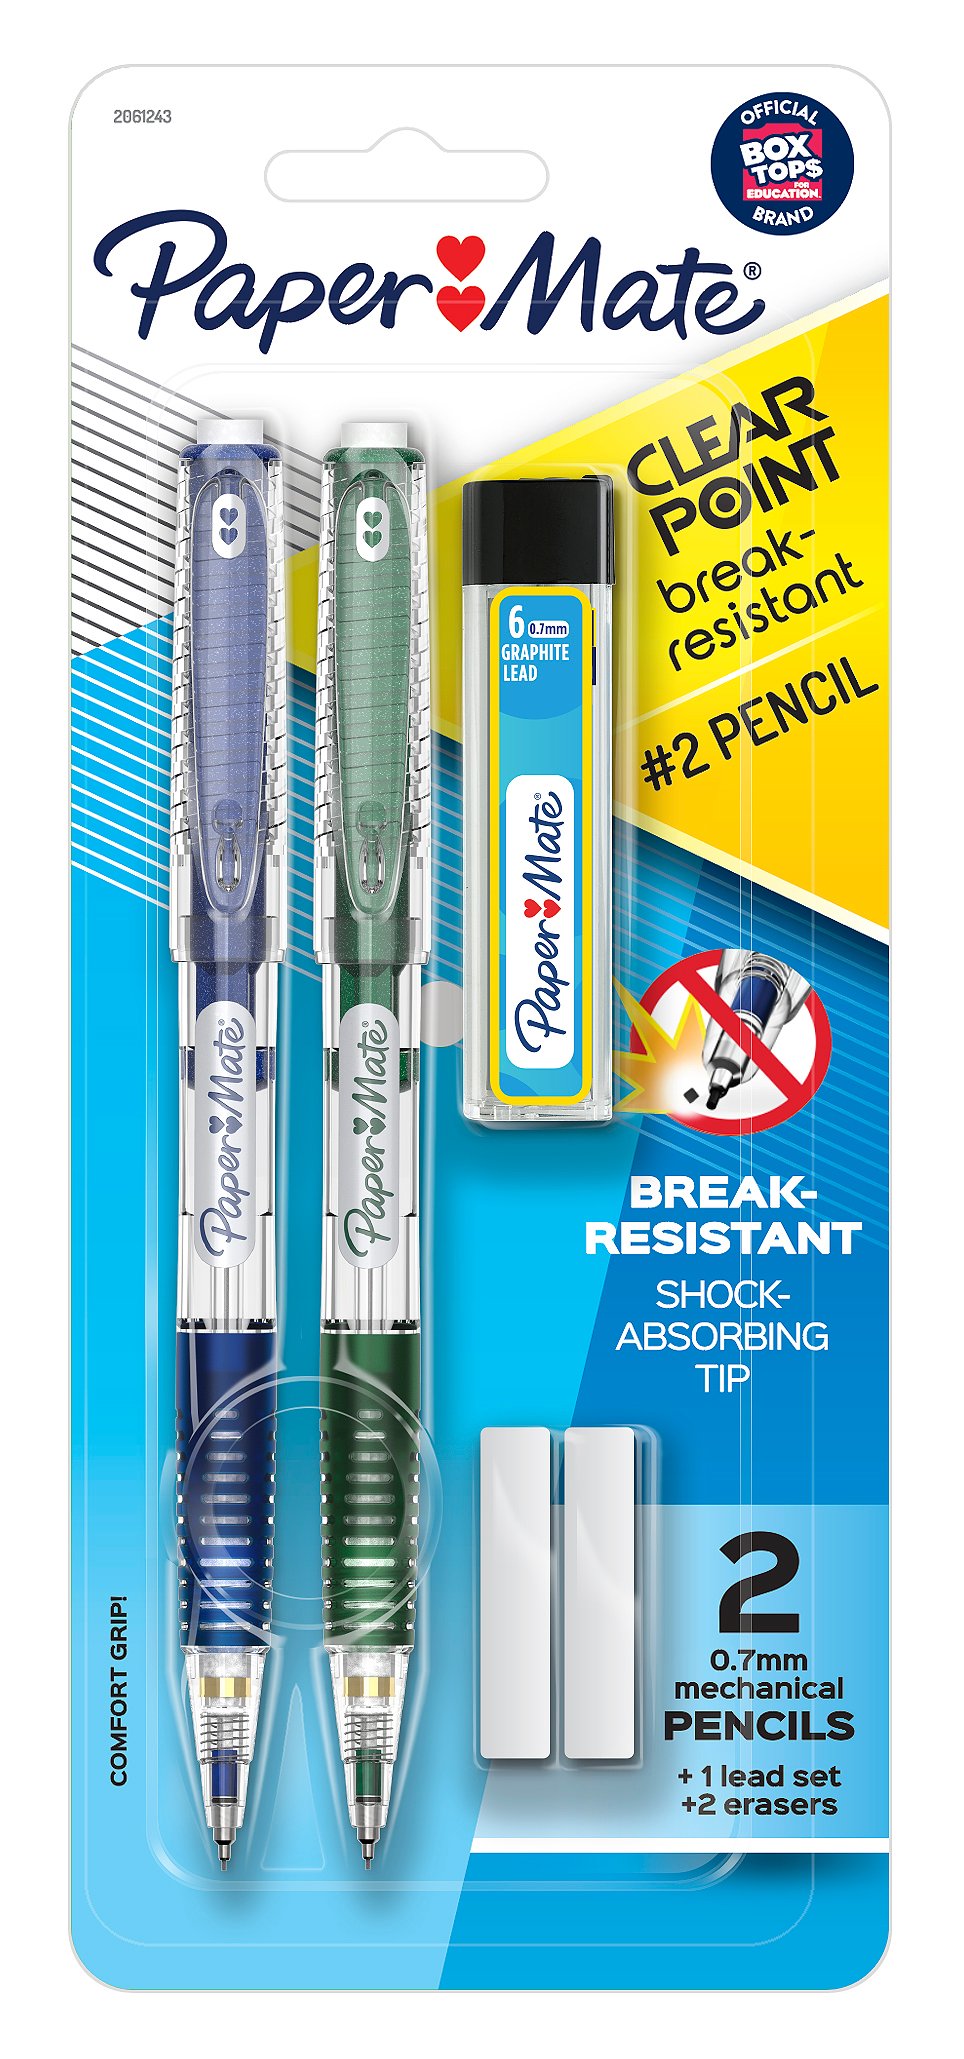  Paper Mate Clearpoint Mechanical Pencils, 0.7 mm Lead